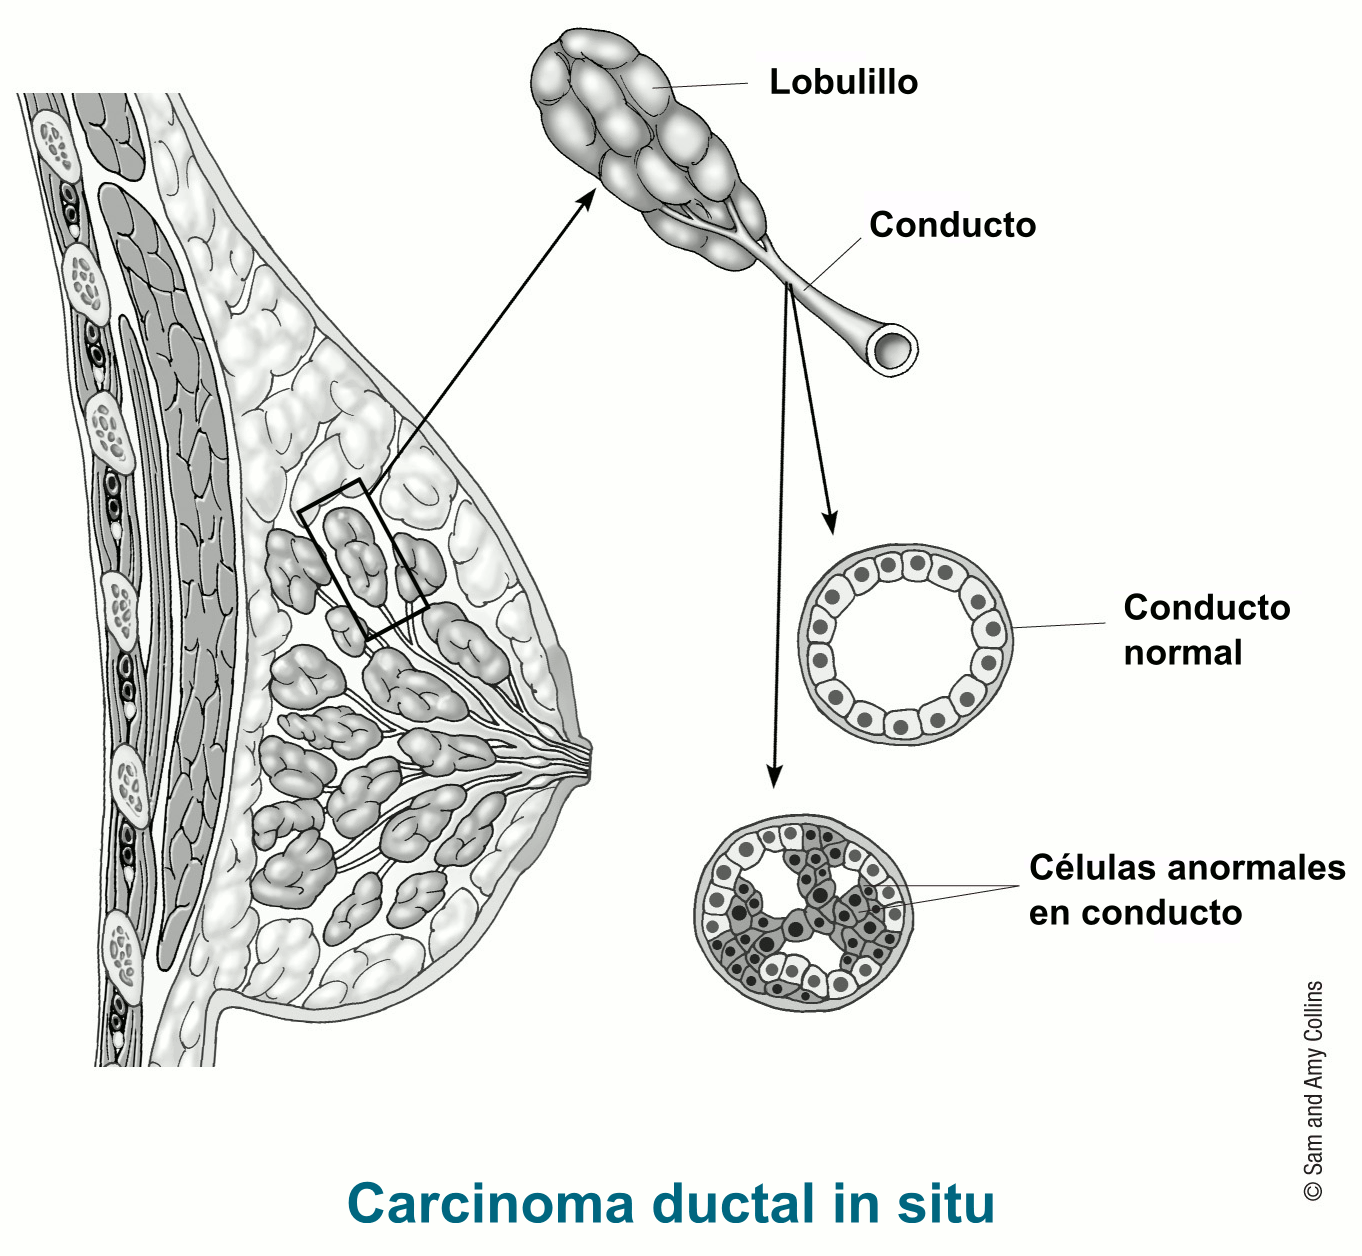 illustration showing details of ductal carcinoma in situ including lobule, duct, normal duct and abnormal cells in duct